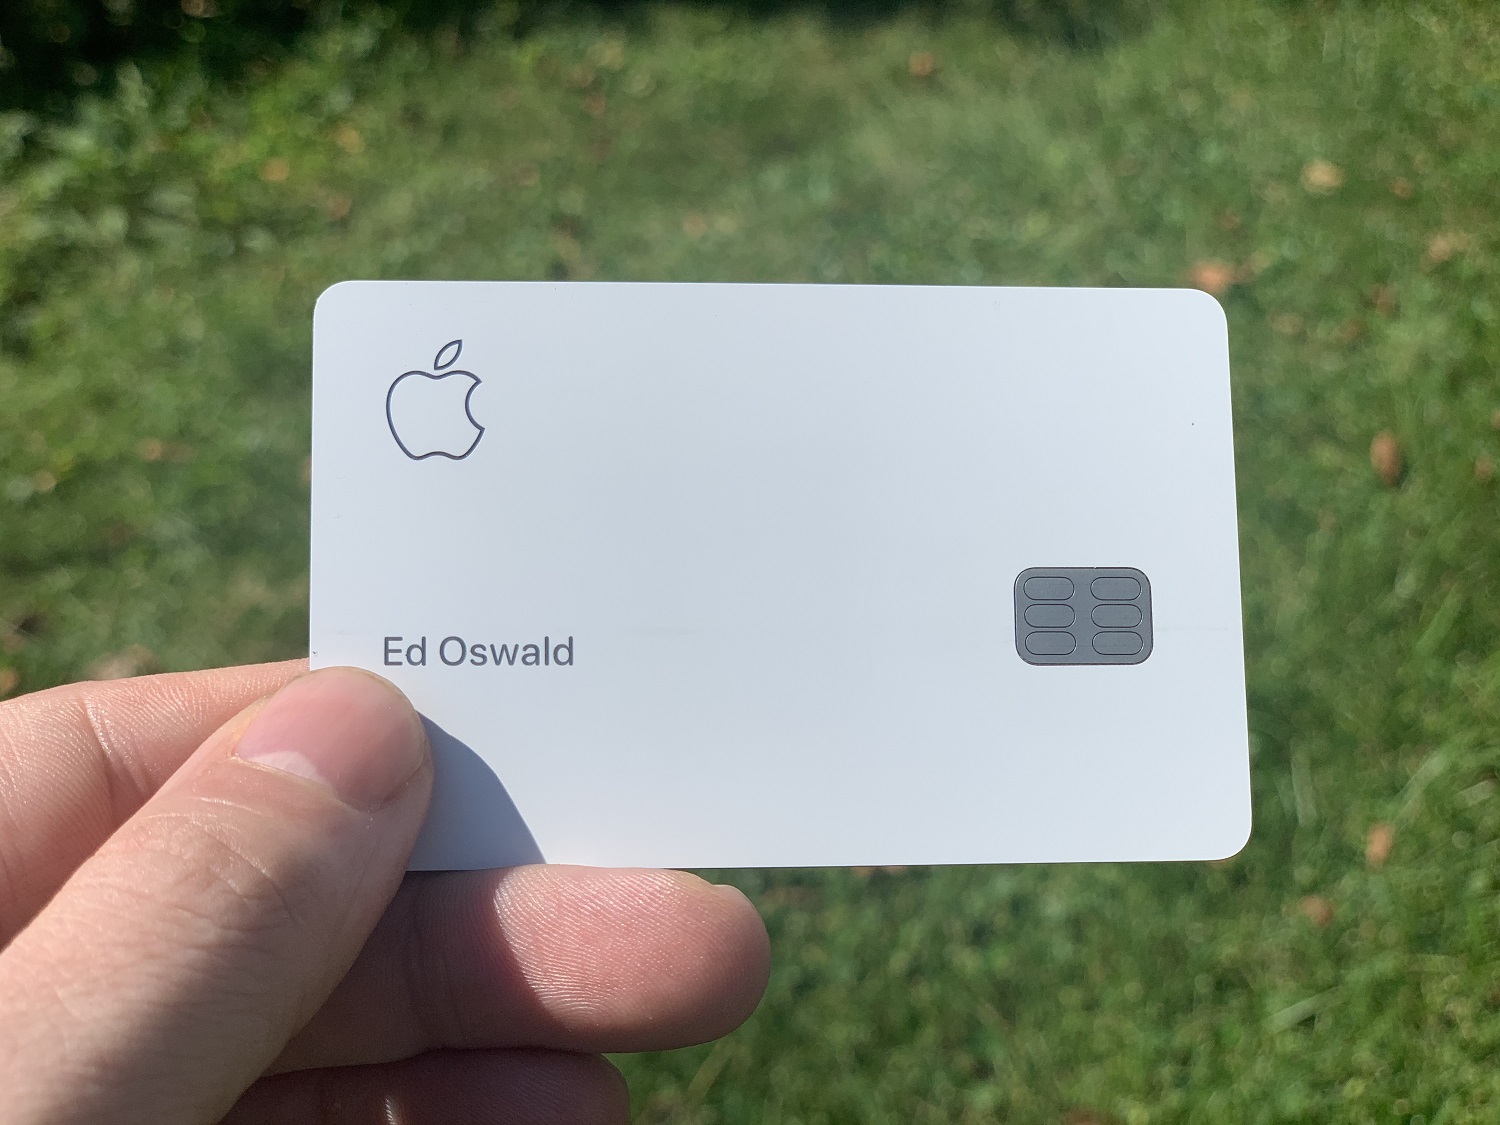 T-Mobile is the Only Wireless Provider to Offer 3% Daily Cash on Apple Card  - T-Mobile Newsroom